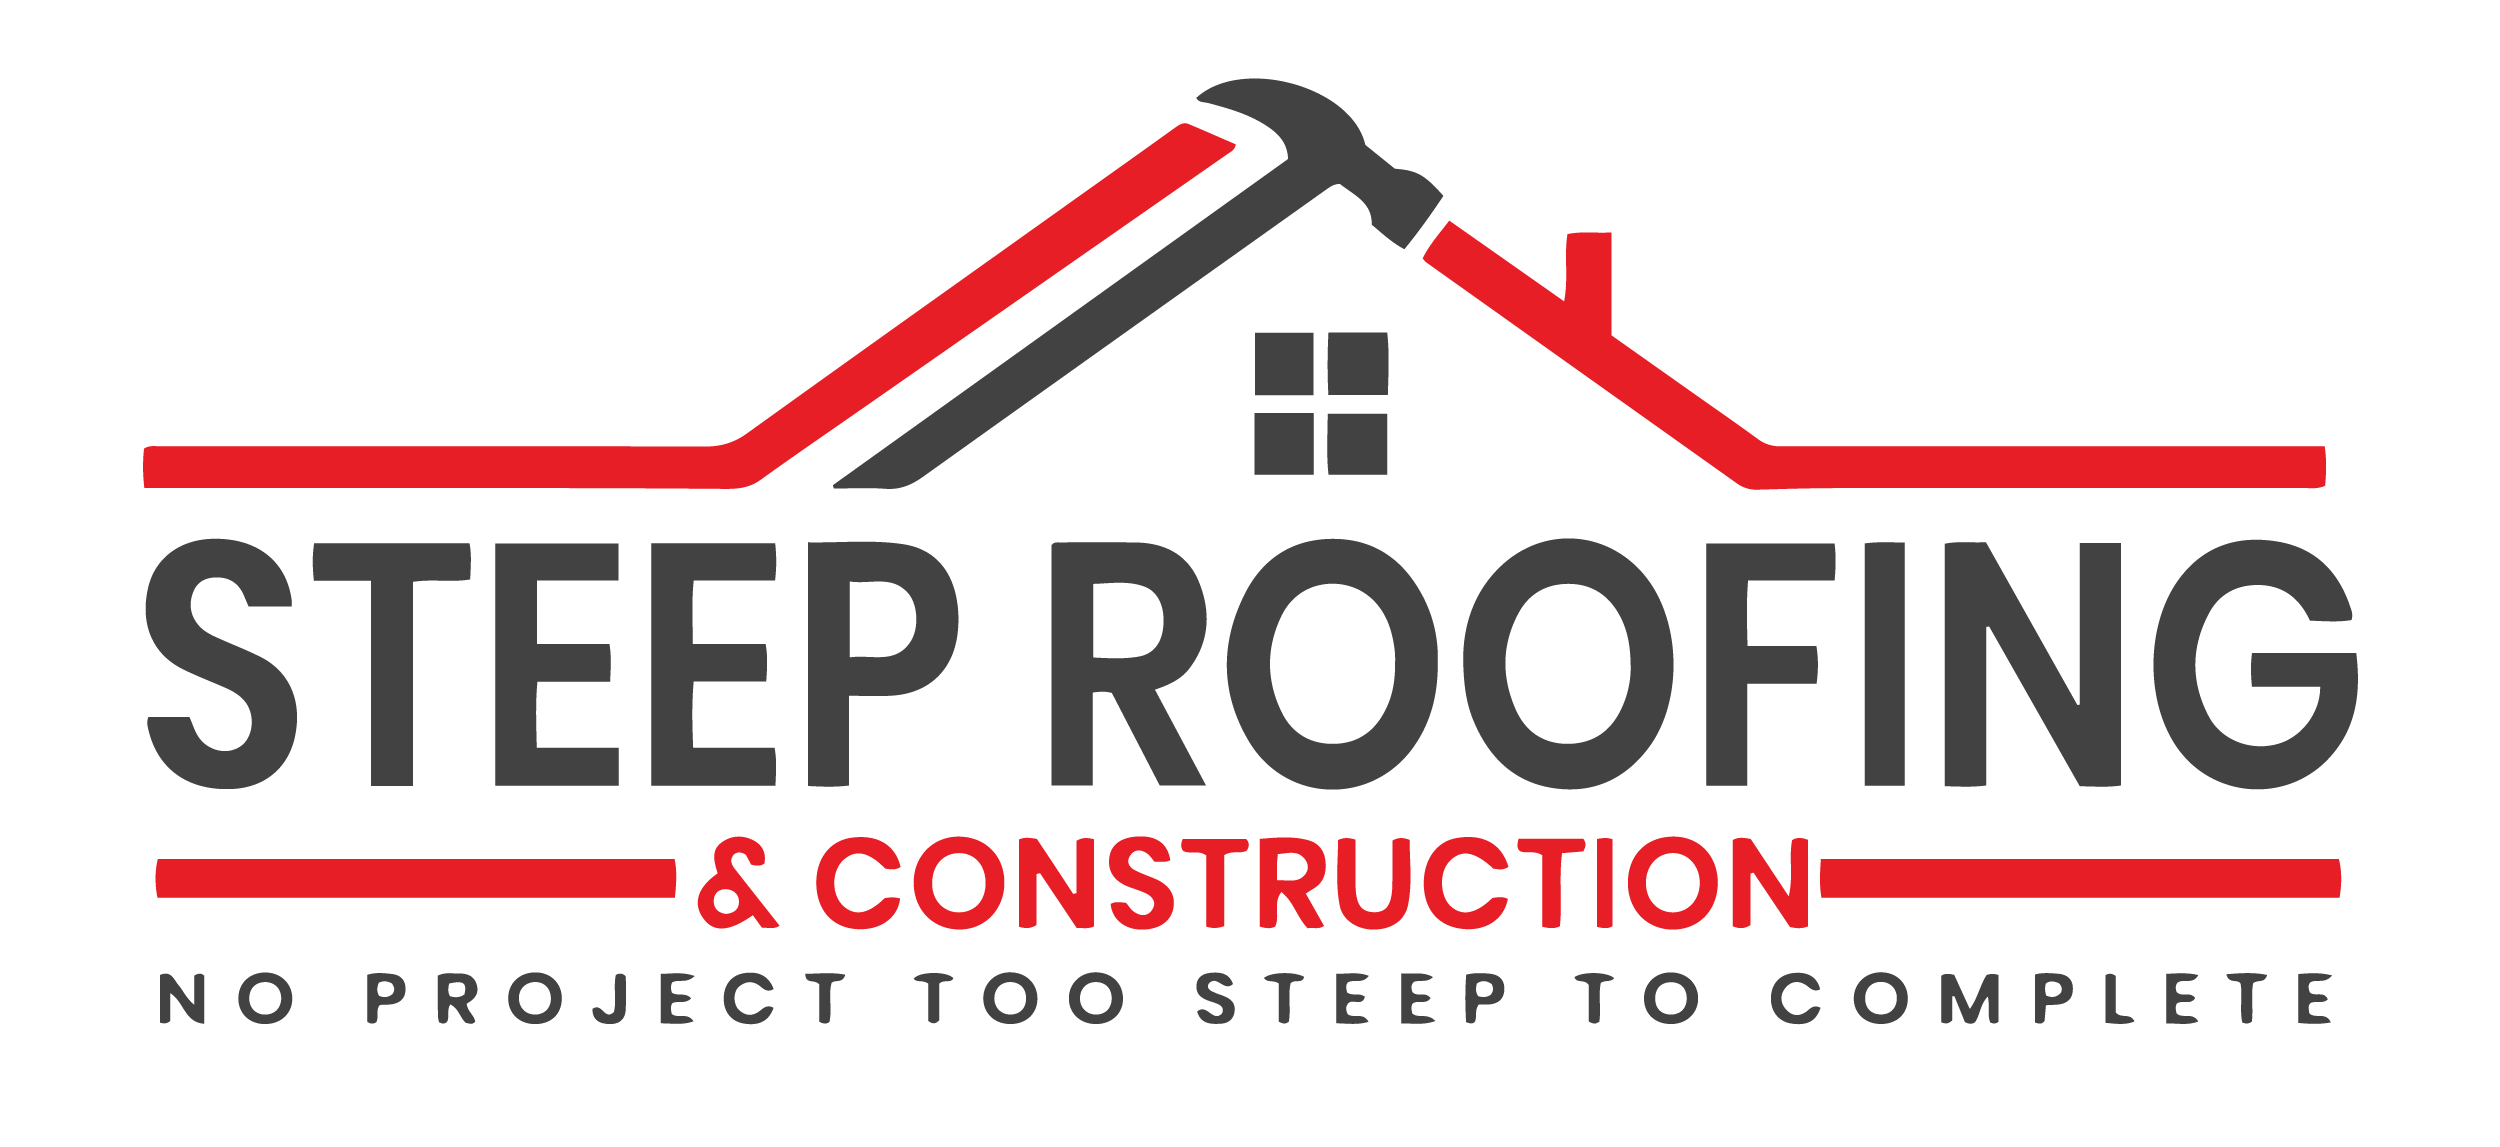 Steep Roofing & Construction Logo